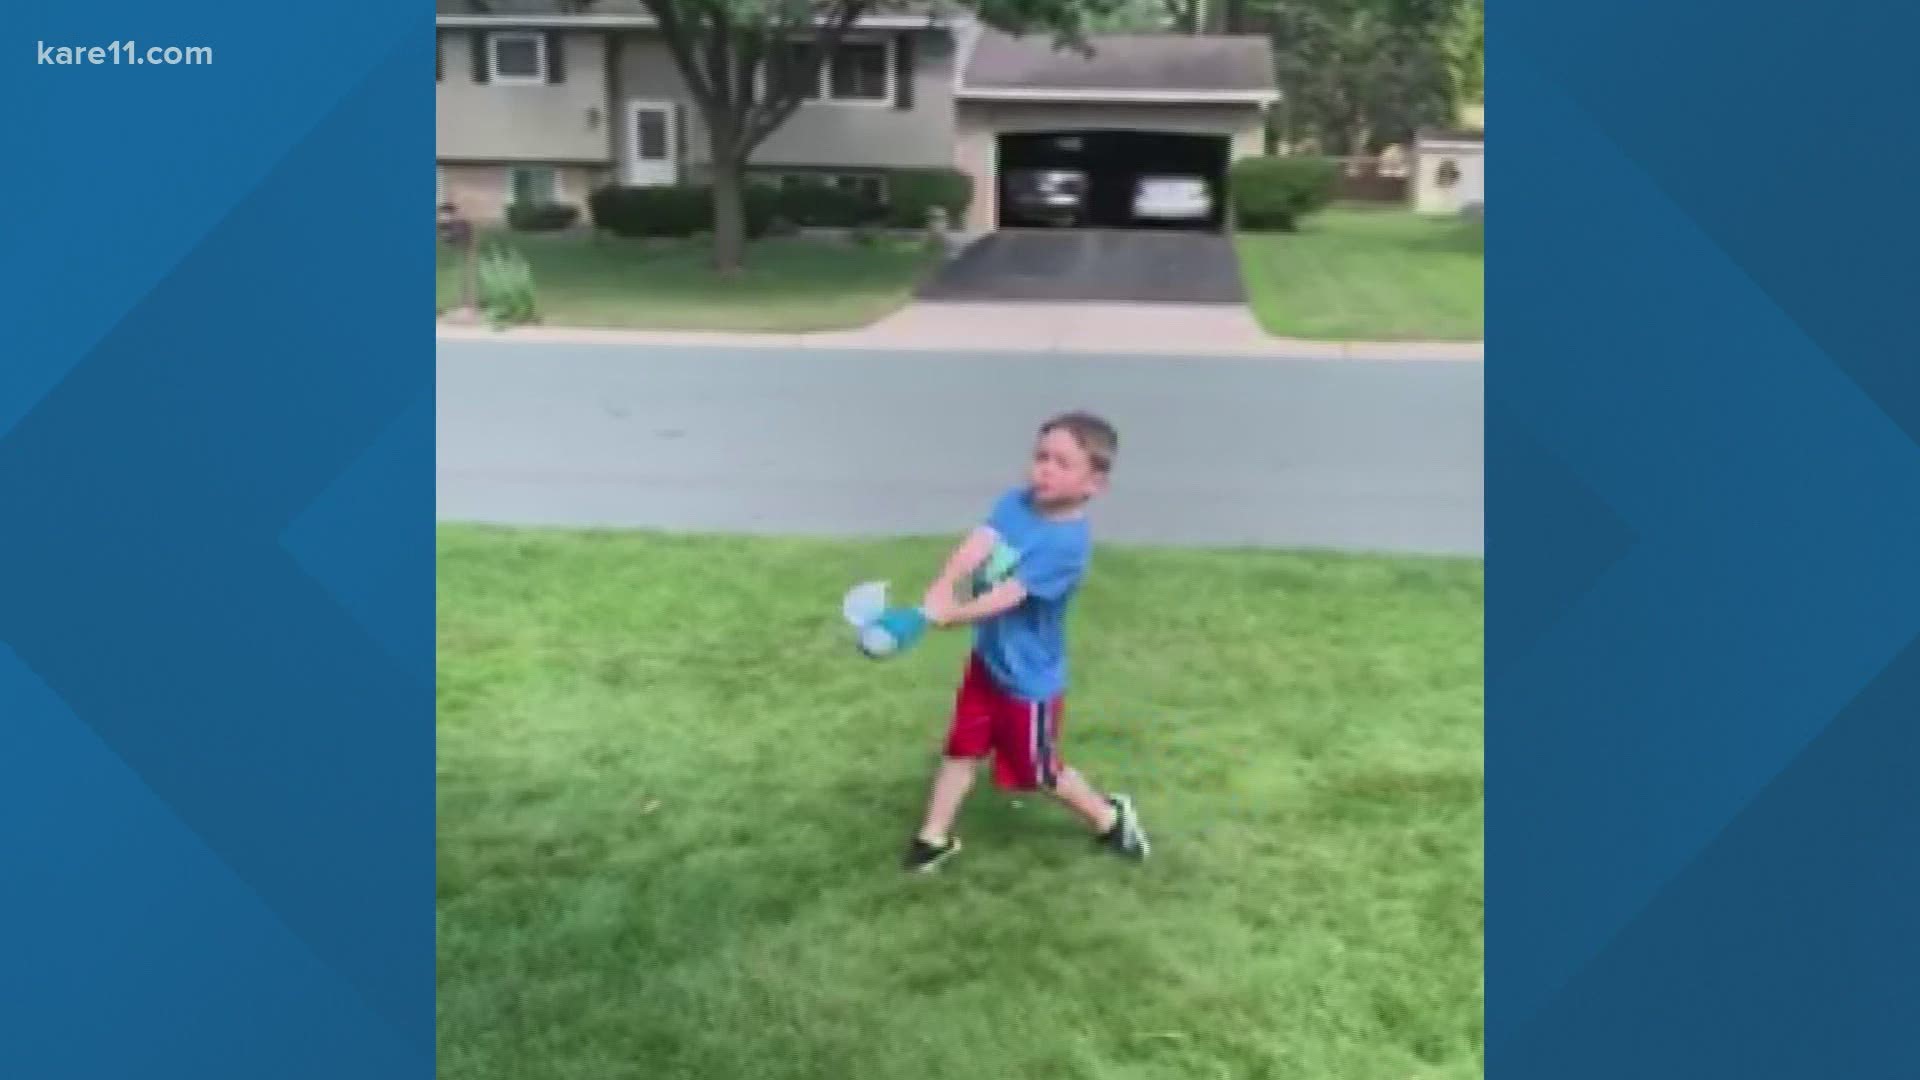 Check out the amazing swing on tonight's edition of "Highlights from Home!"